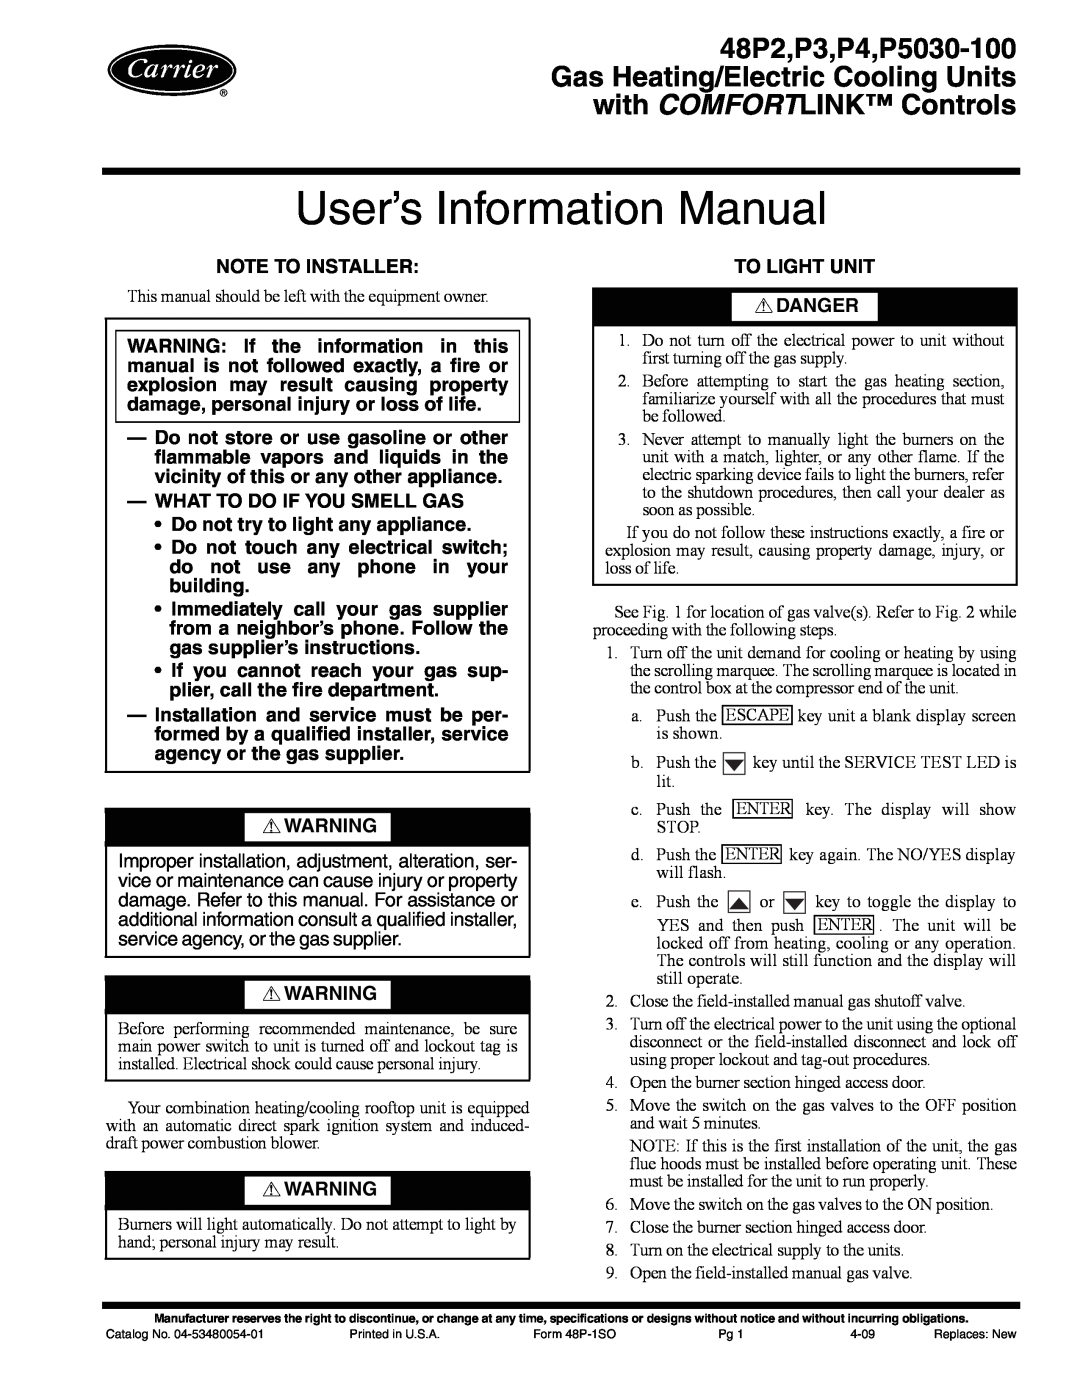 Carrier P3, P5030-100, 48P2 installation instructions Installation Instructions, Contents, General, Safety Considerations 